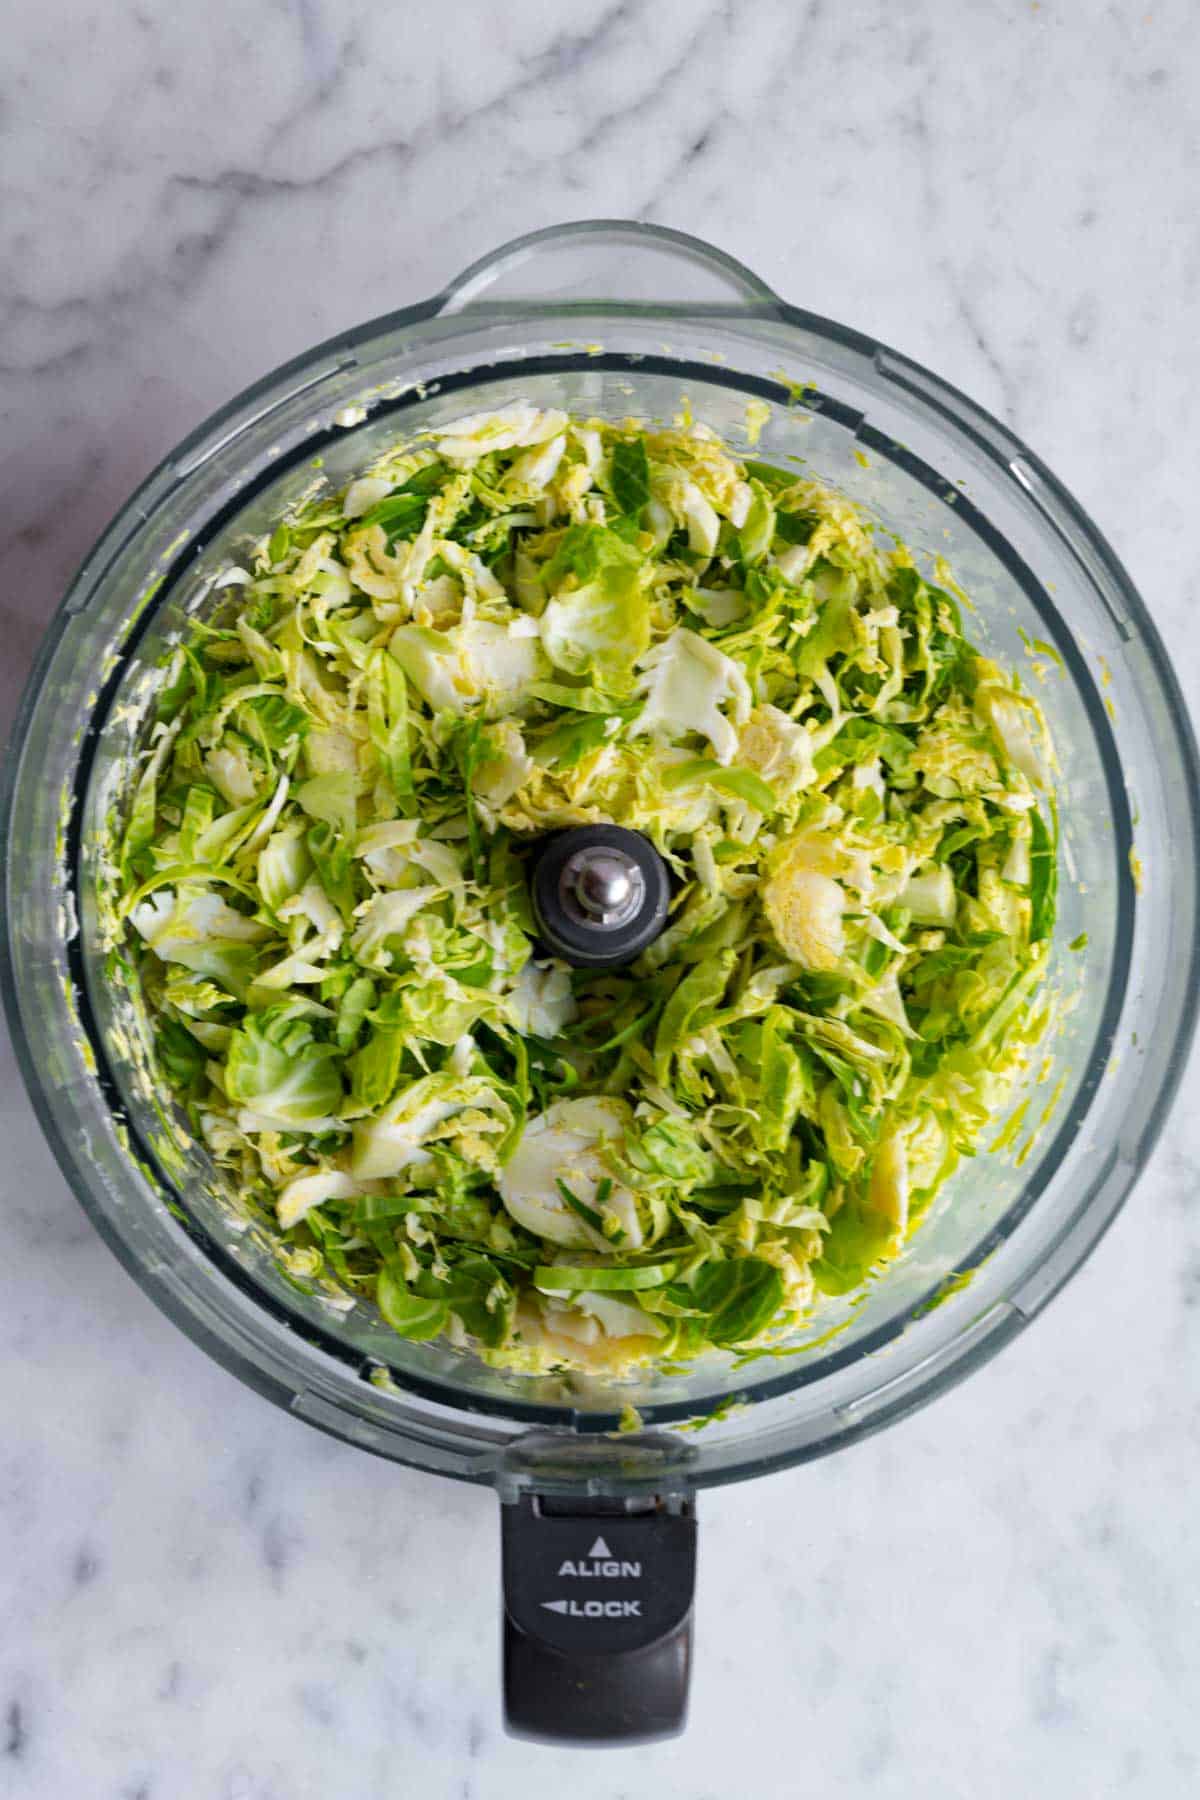 Shaved Brussels sprouts in canister of a food processor.